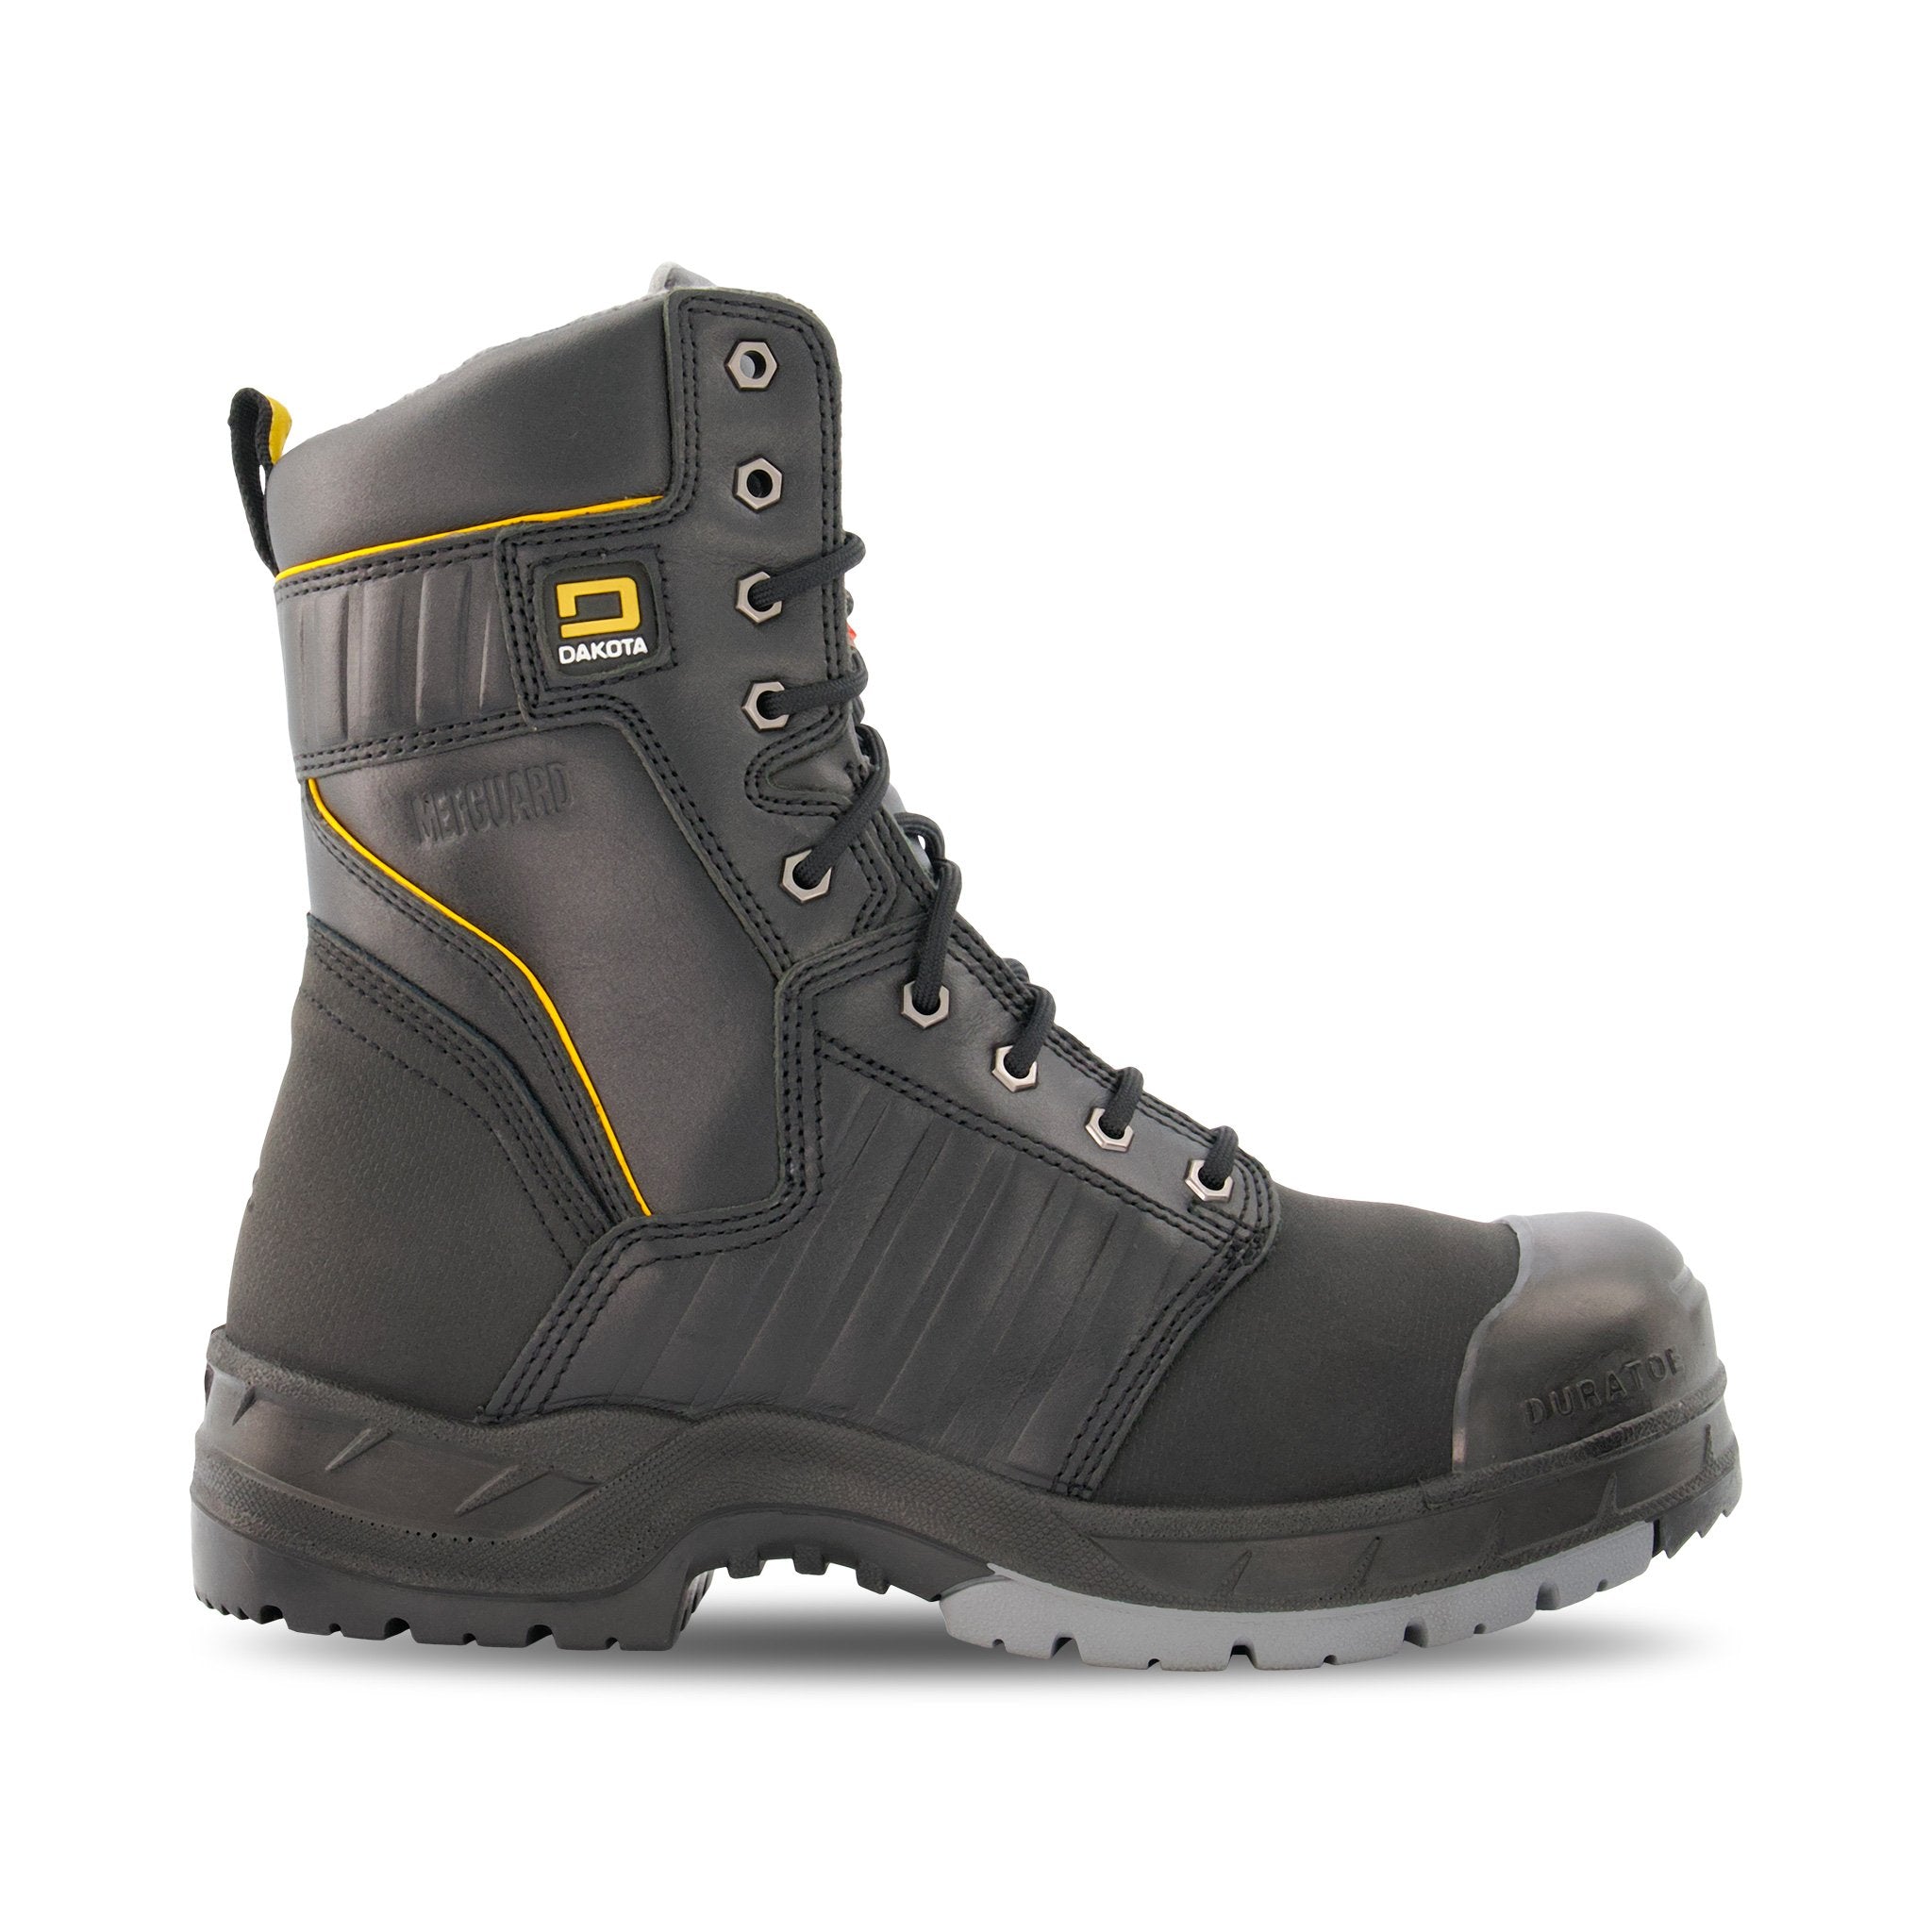 Boots Steel Toe Composite Plated 